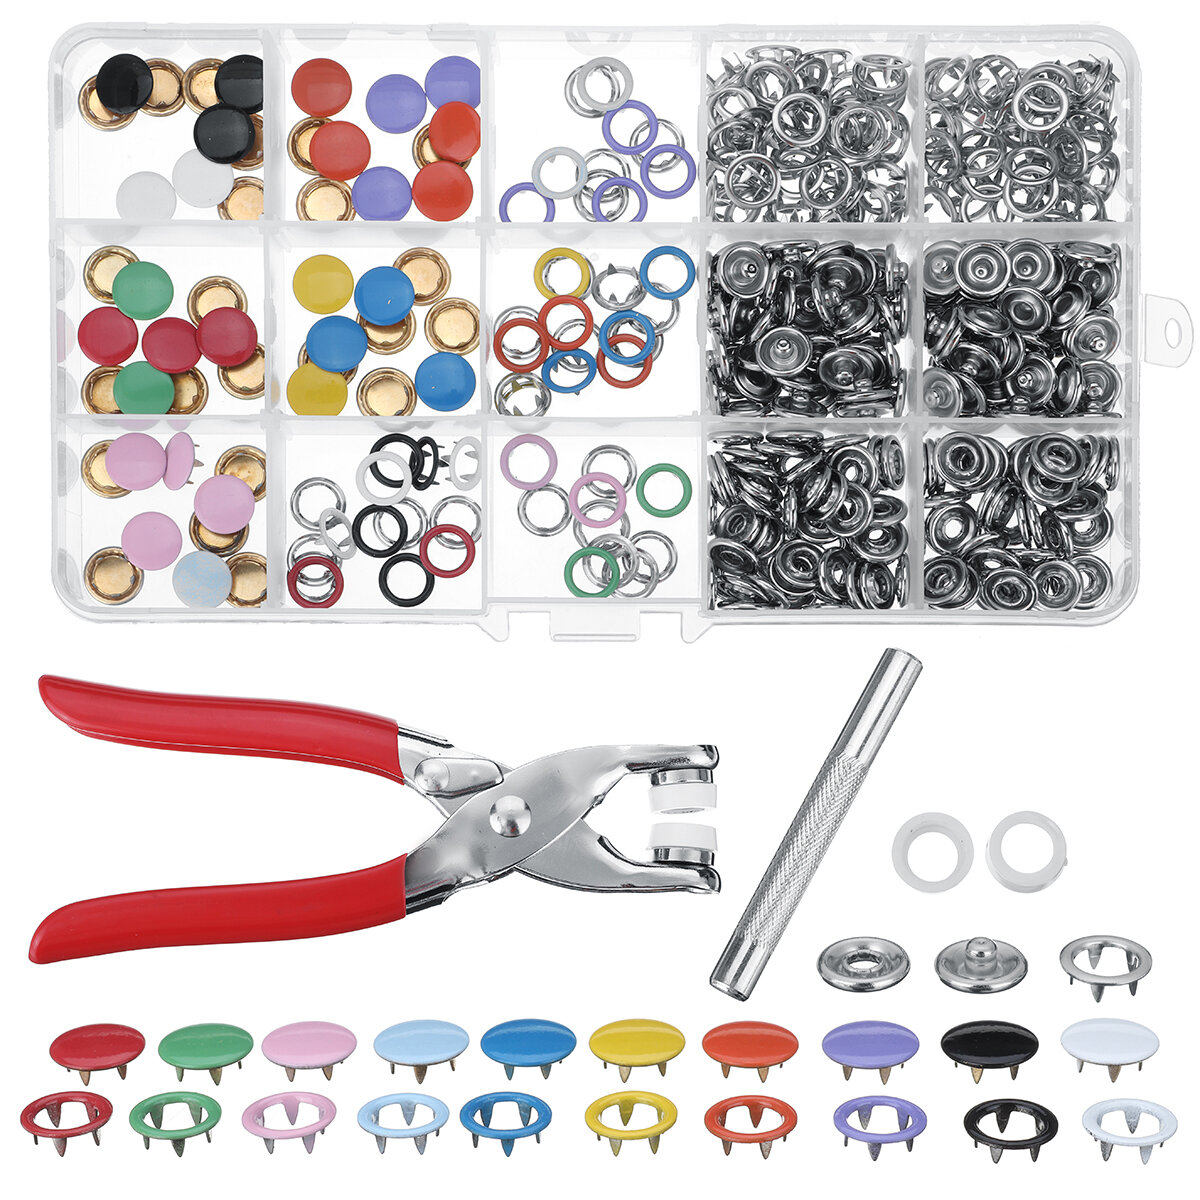 100200 Sets DIY Press Studs Tools Kit Assorted Colors Snap Metal Sewing Buttons